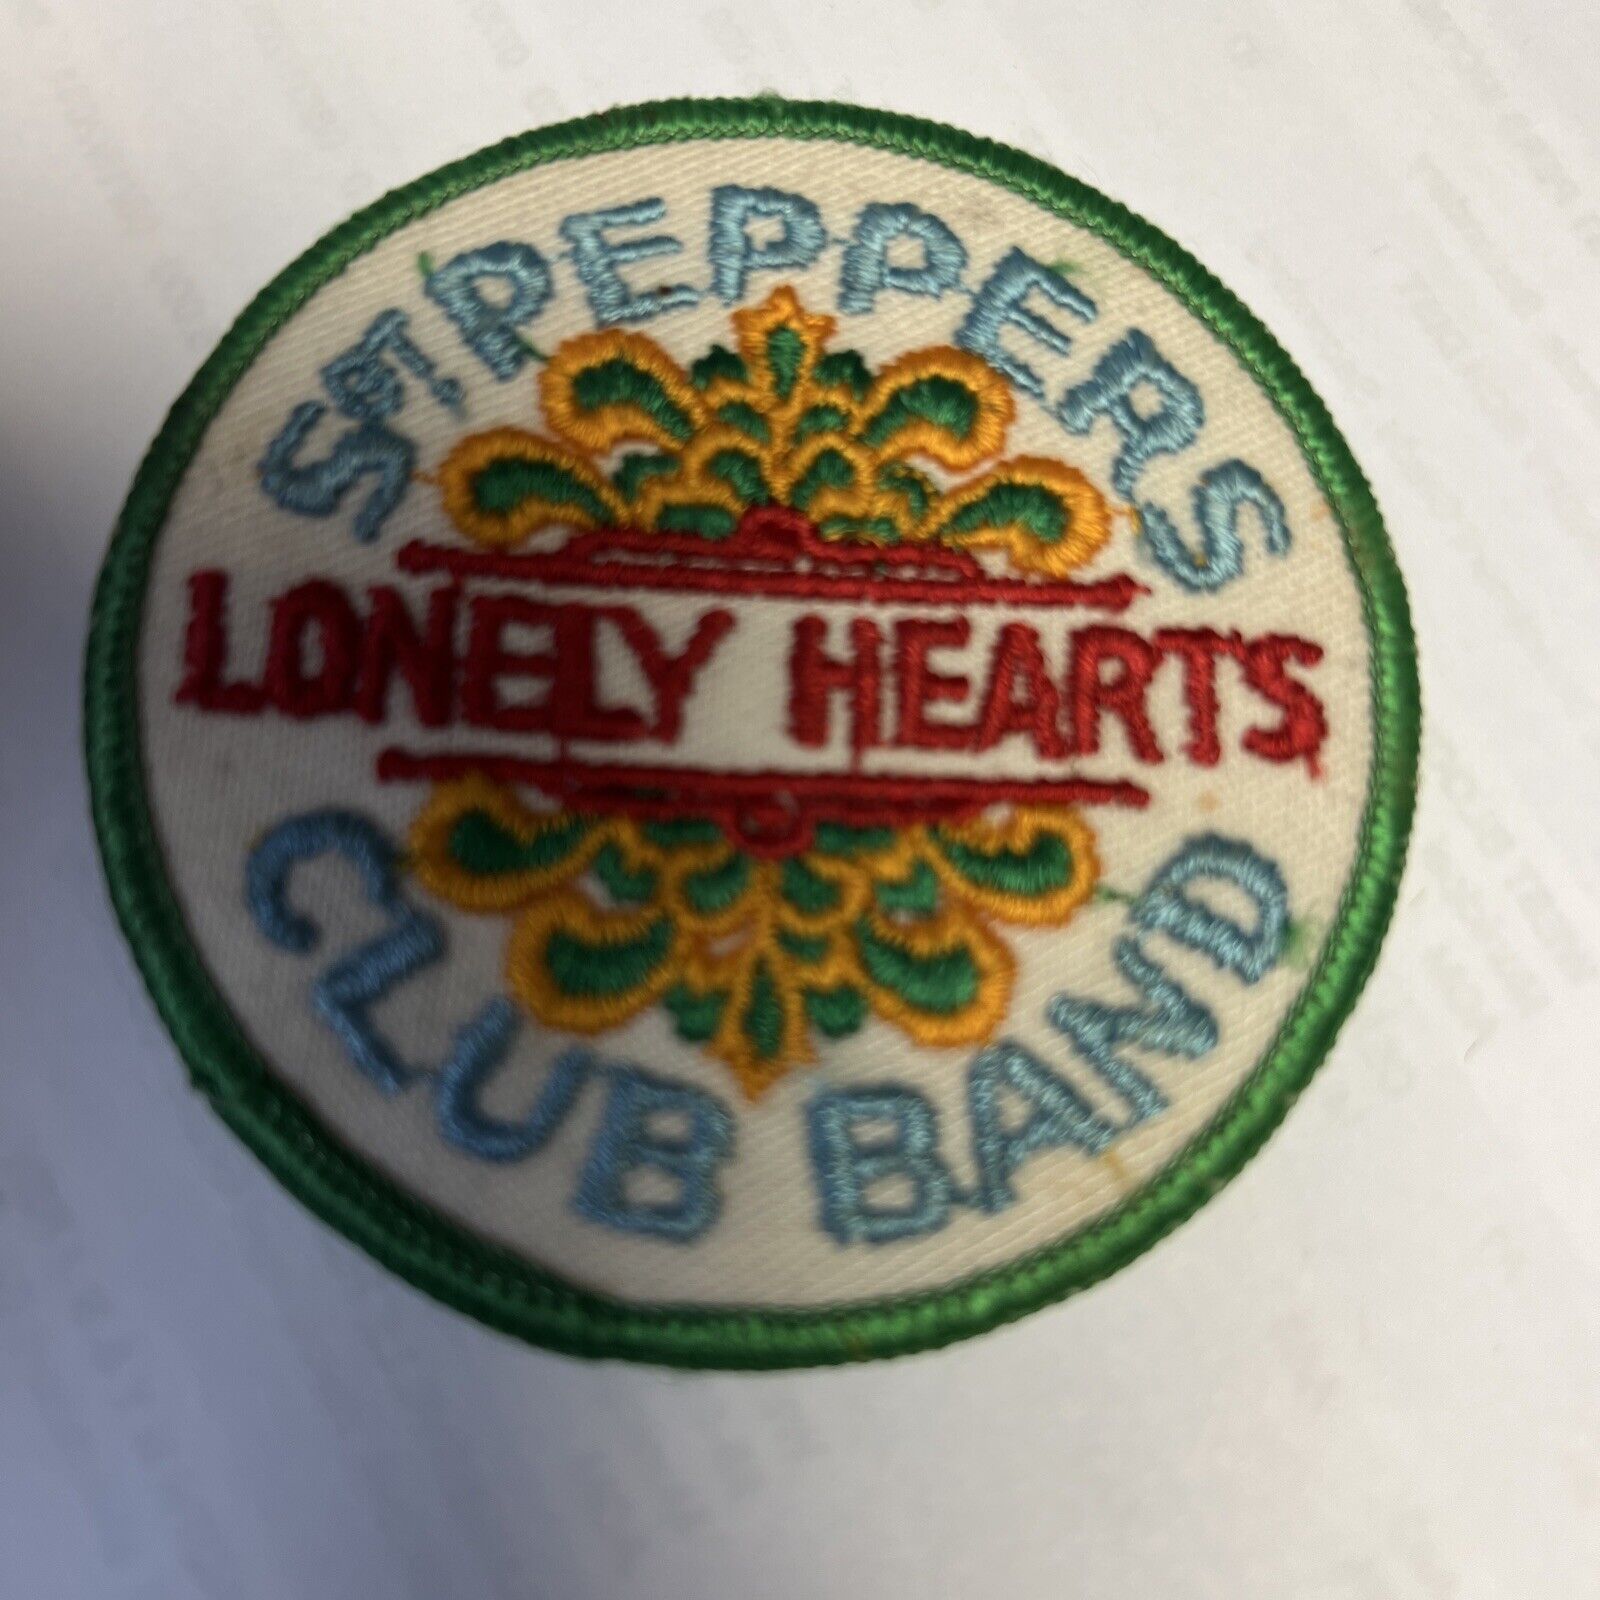 Original Vintage 1960's Beatles Sgt. Peppers Lonely Hearts Club Band Patch